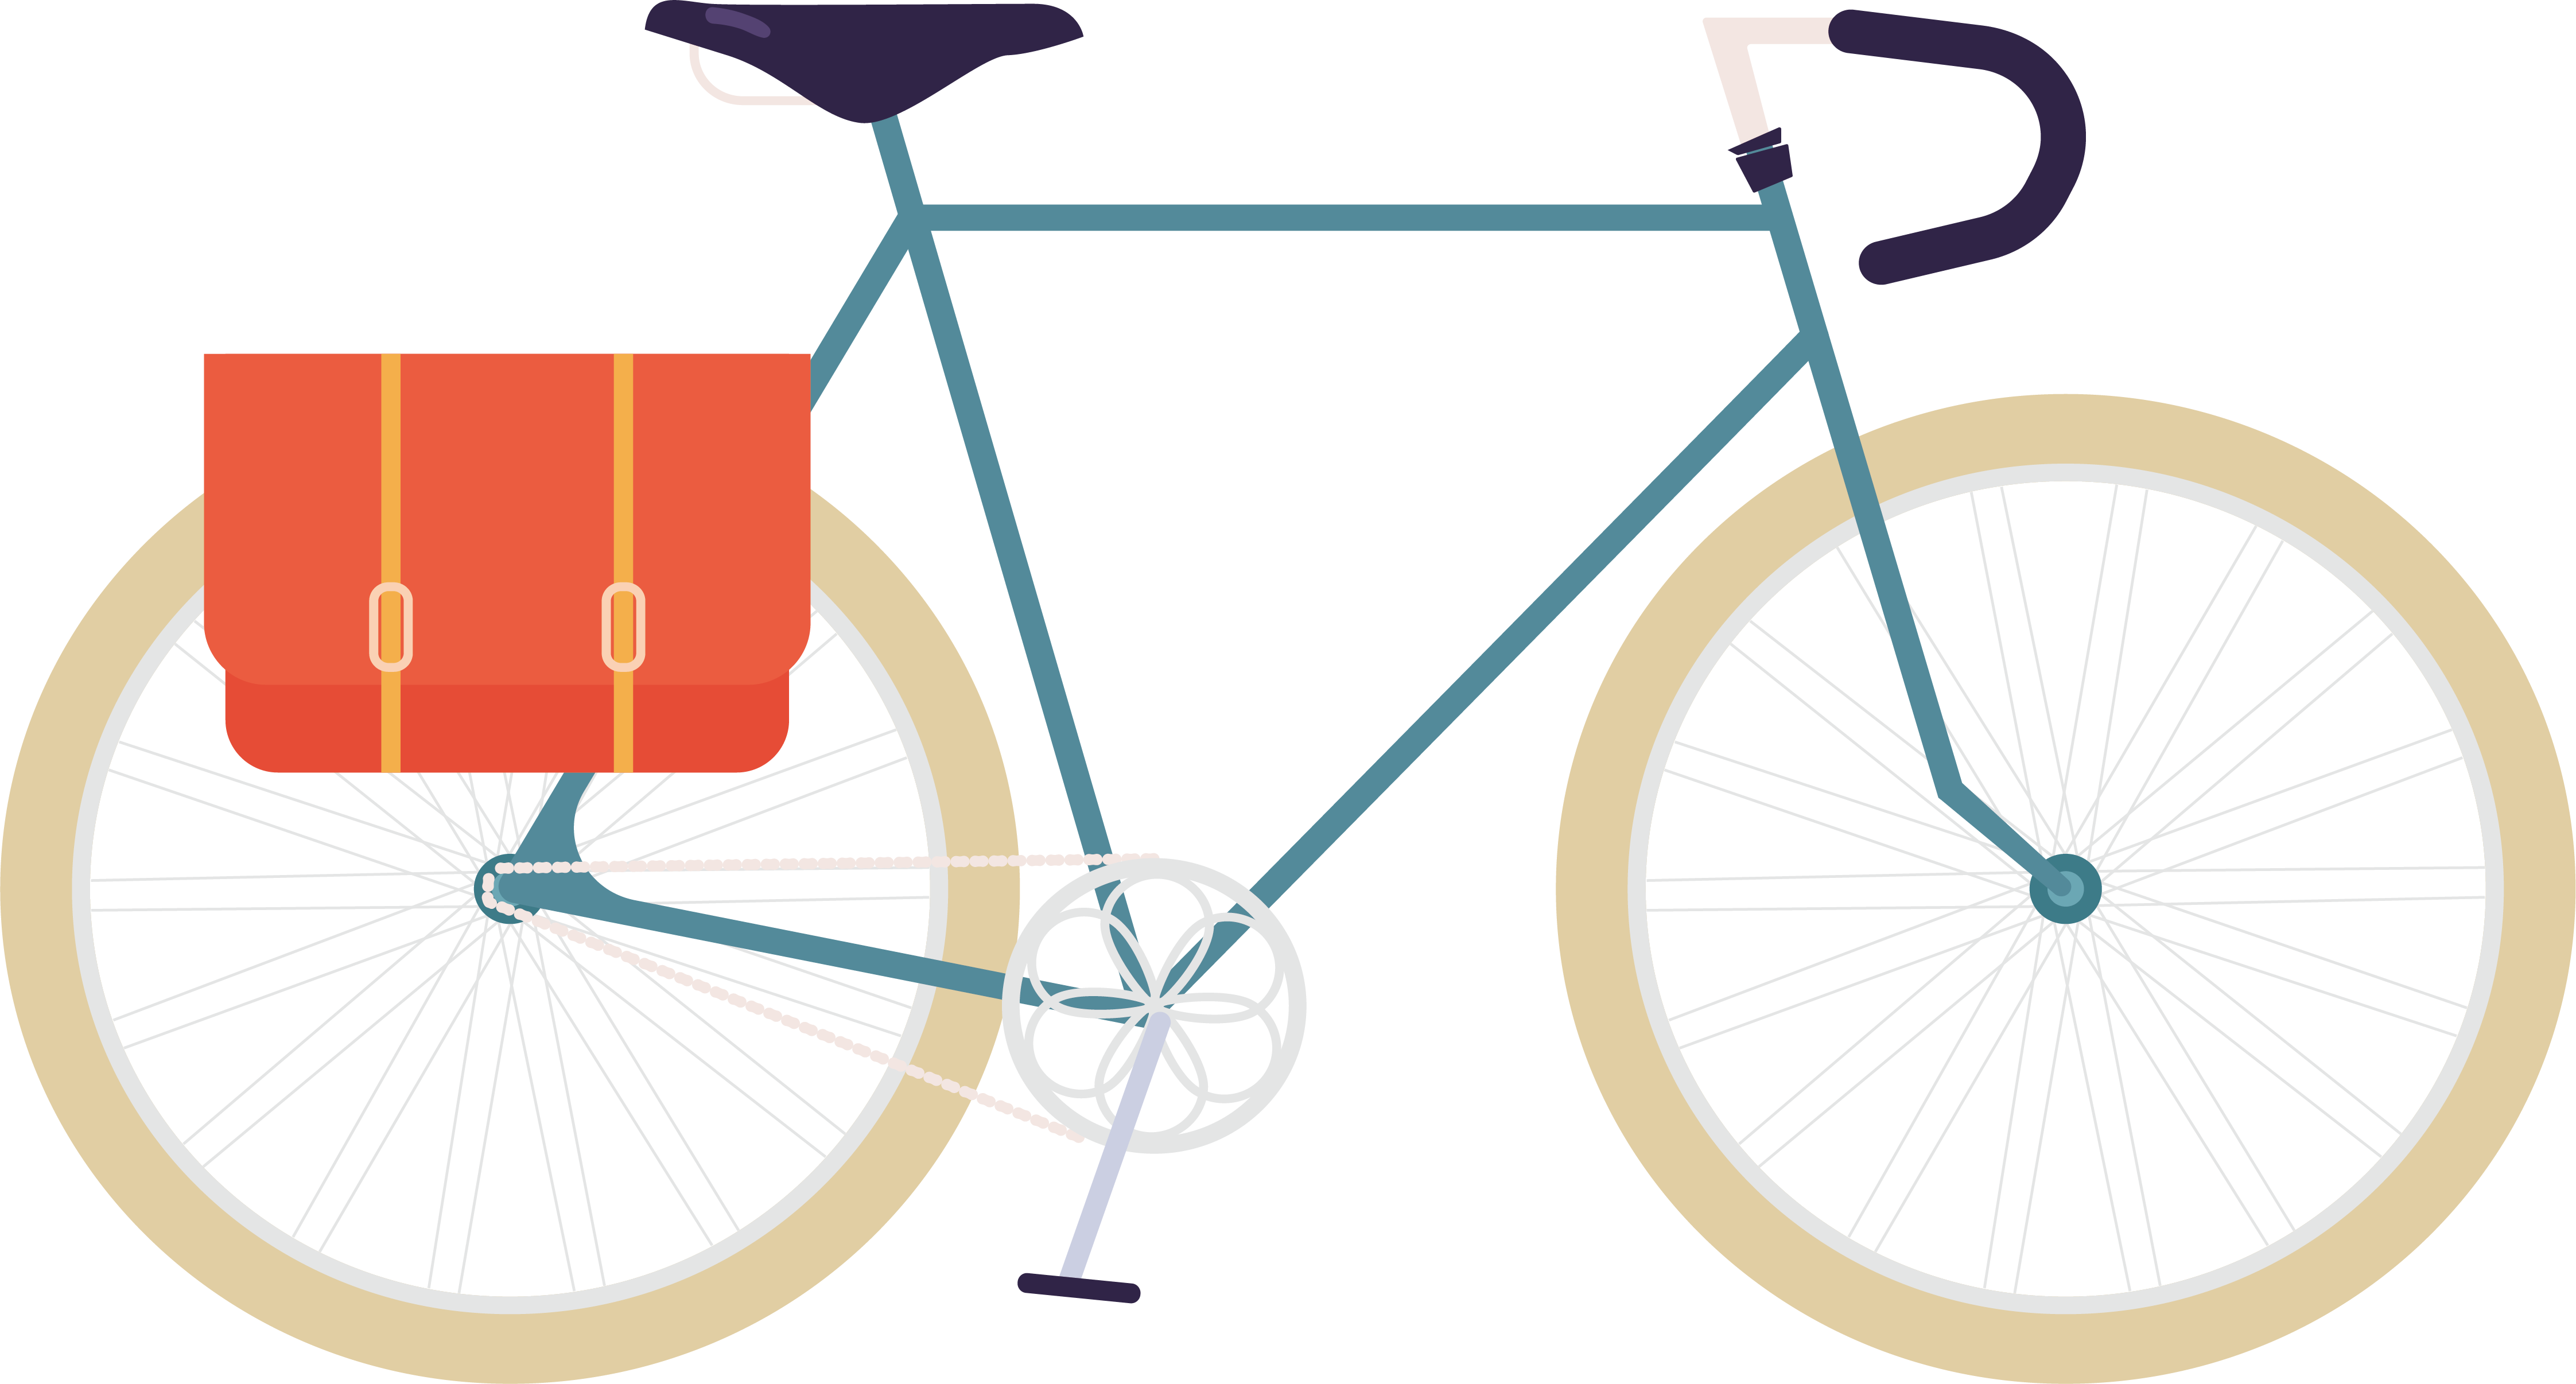 A Blue Bicycle With A Bag On The Front